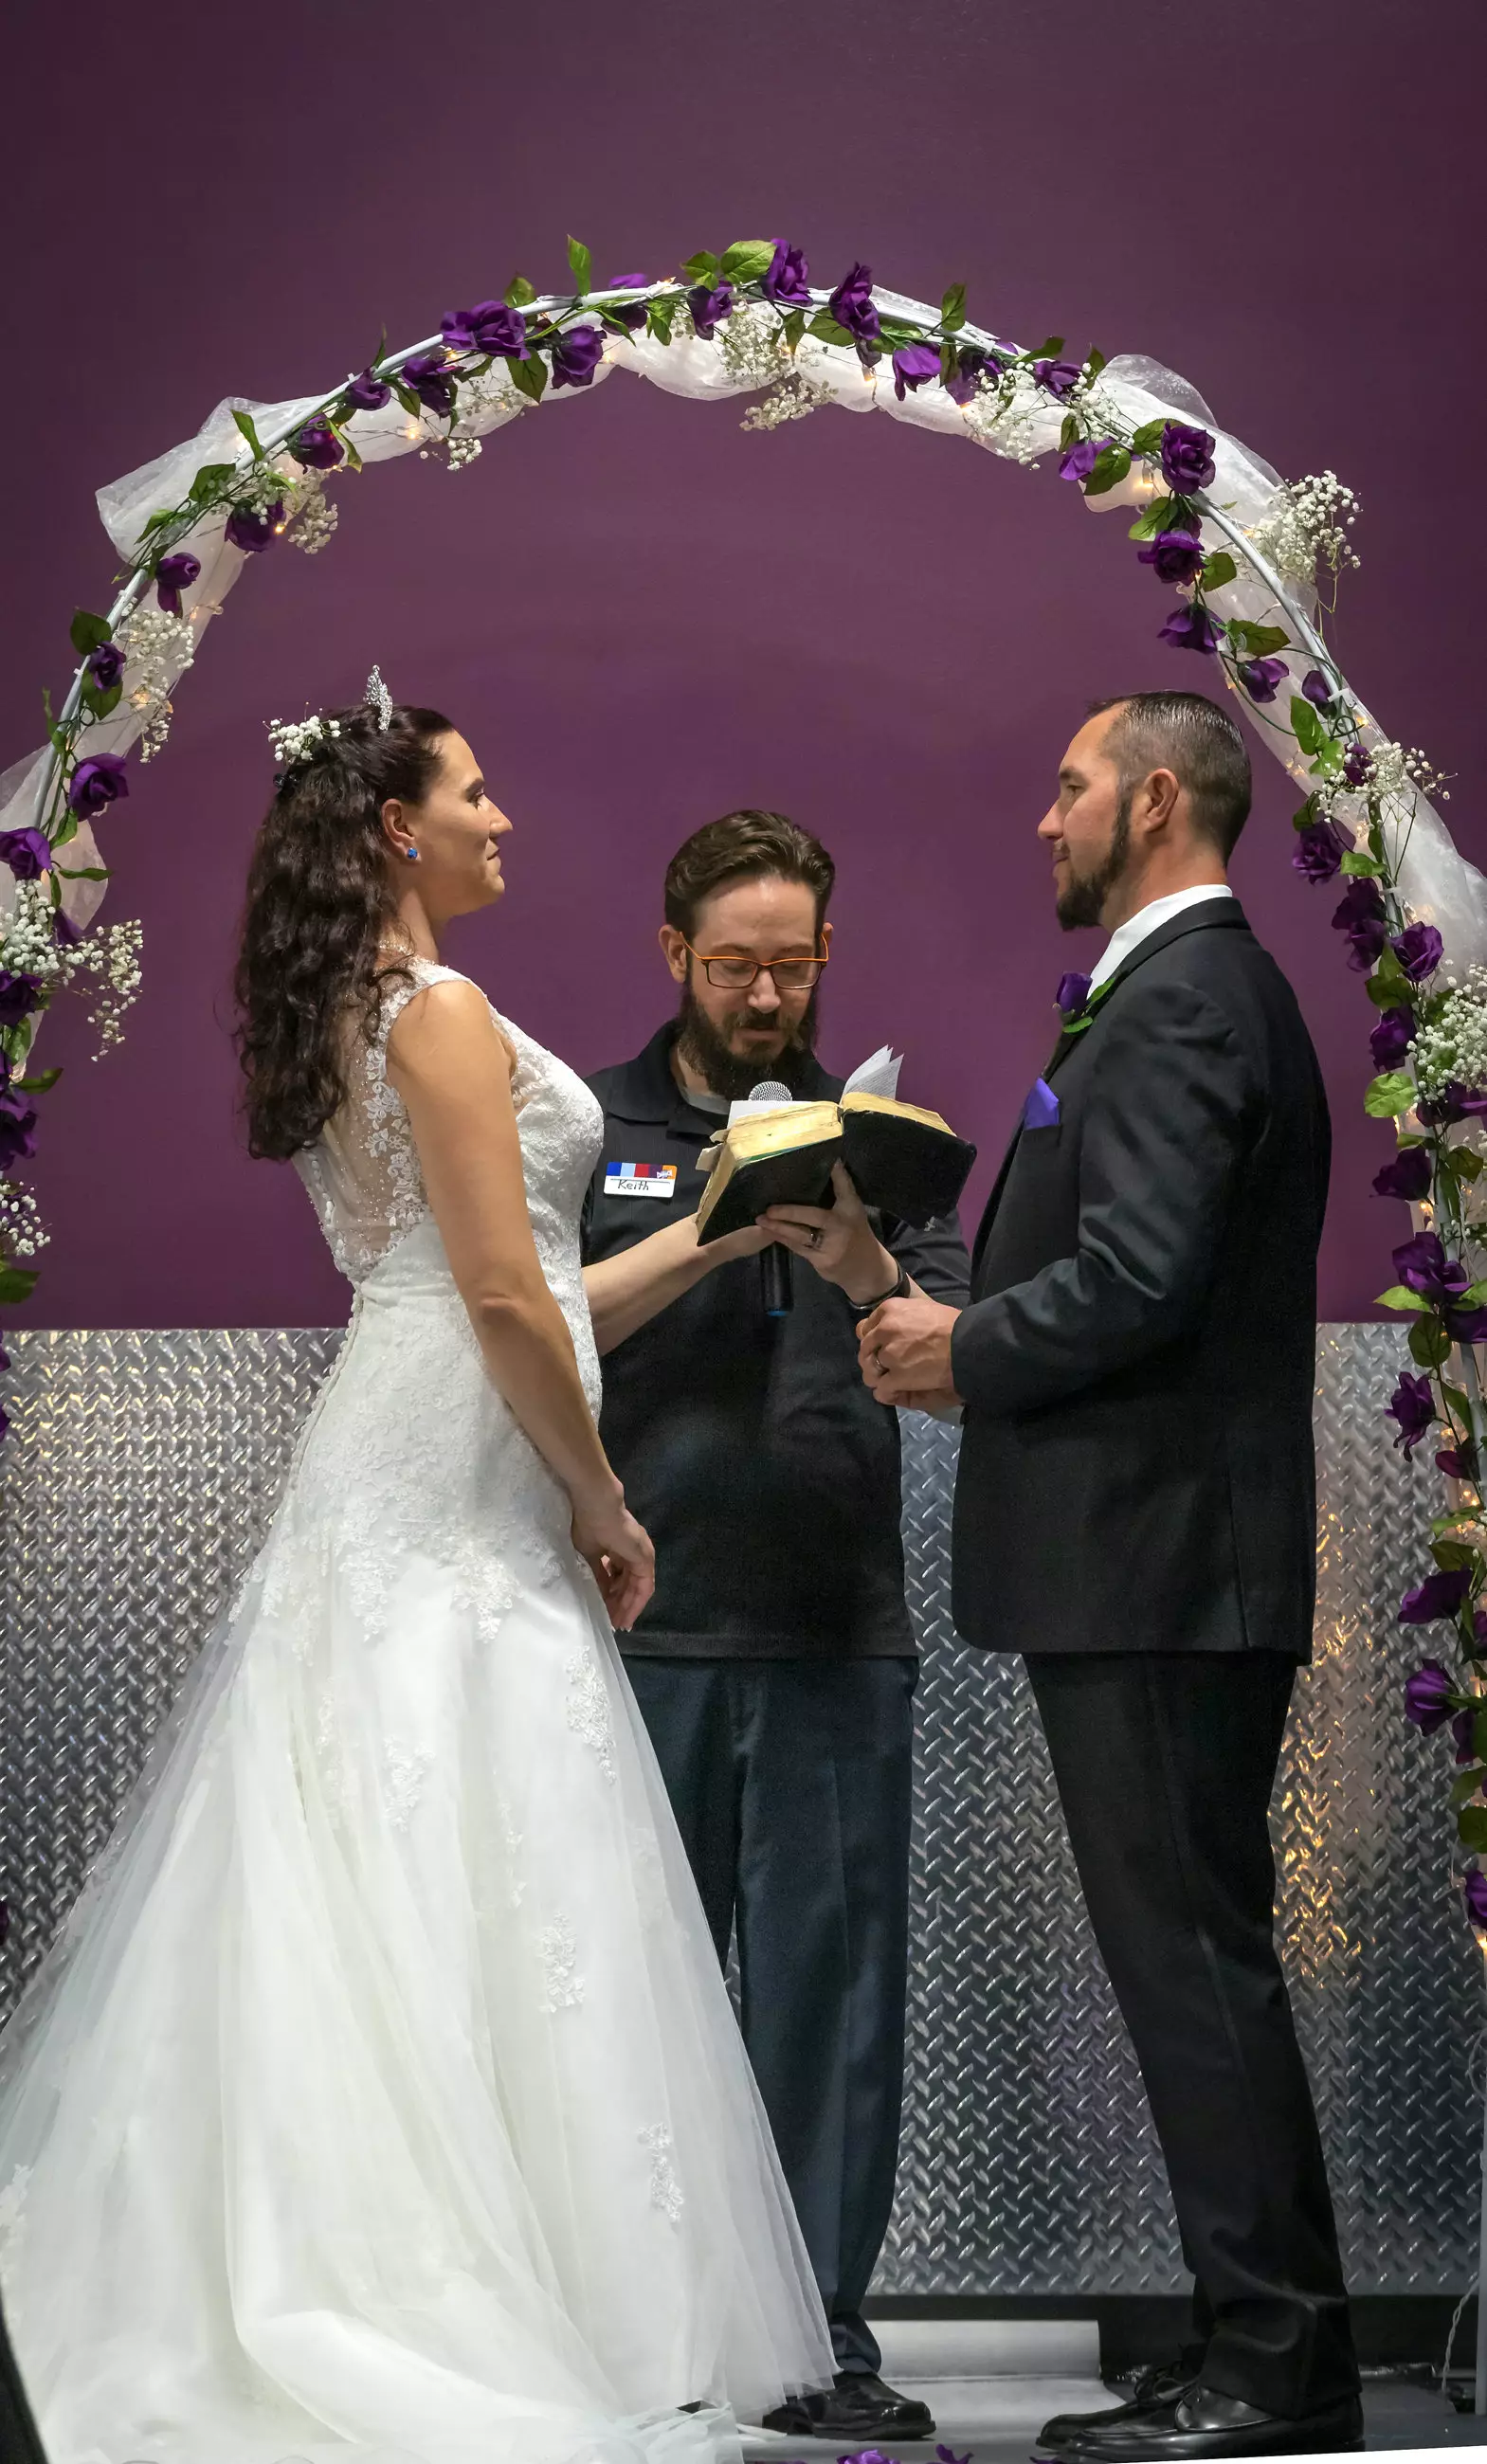 The couple got hitched at their local gym, which they say has helped them overcome their drug addiction.